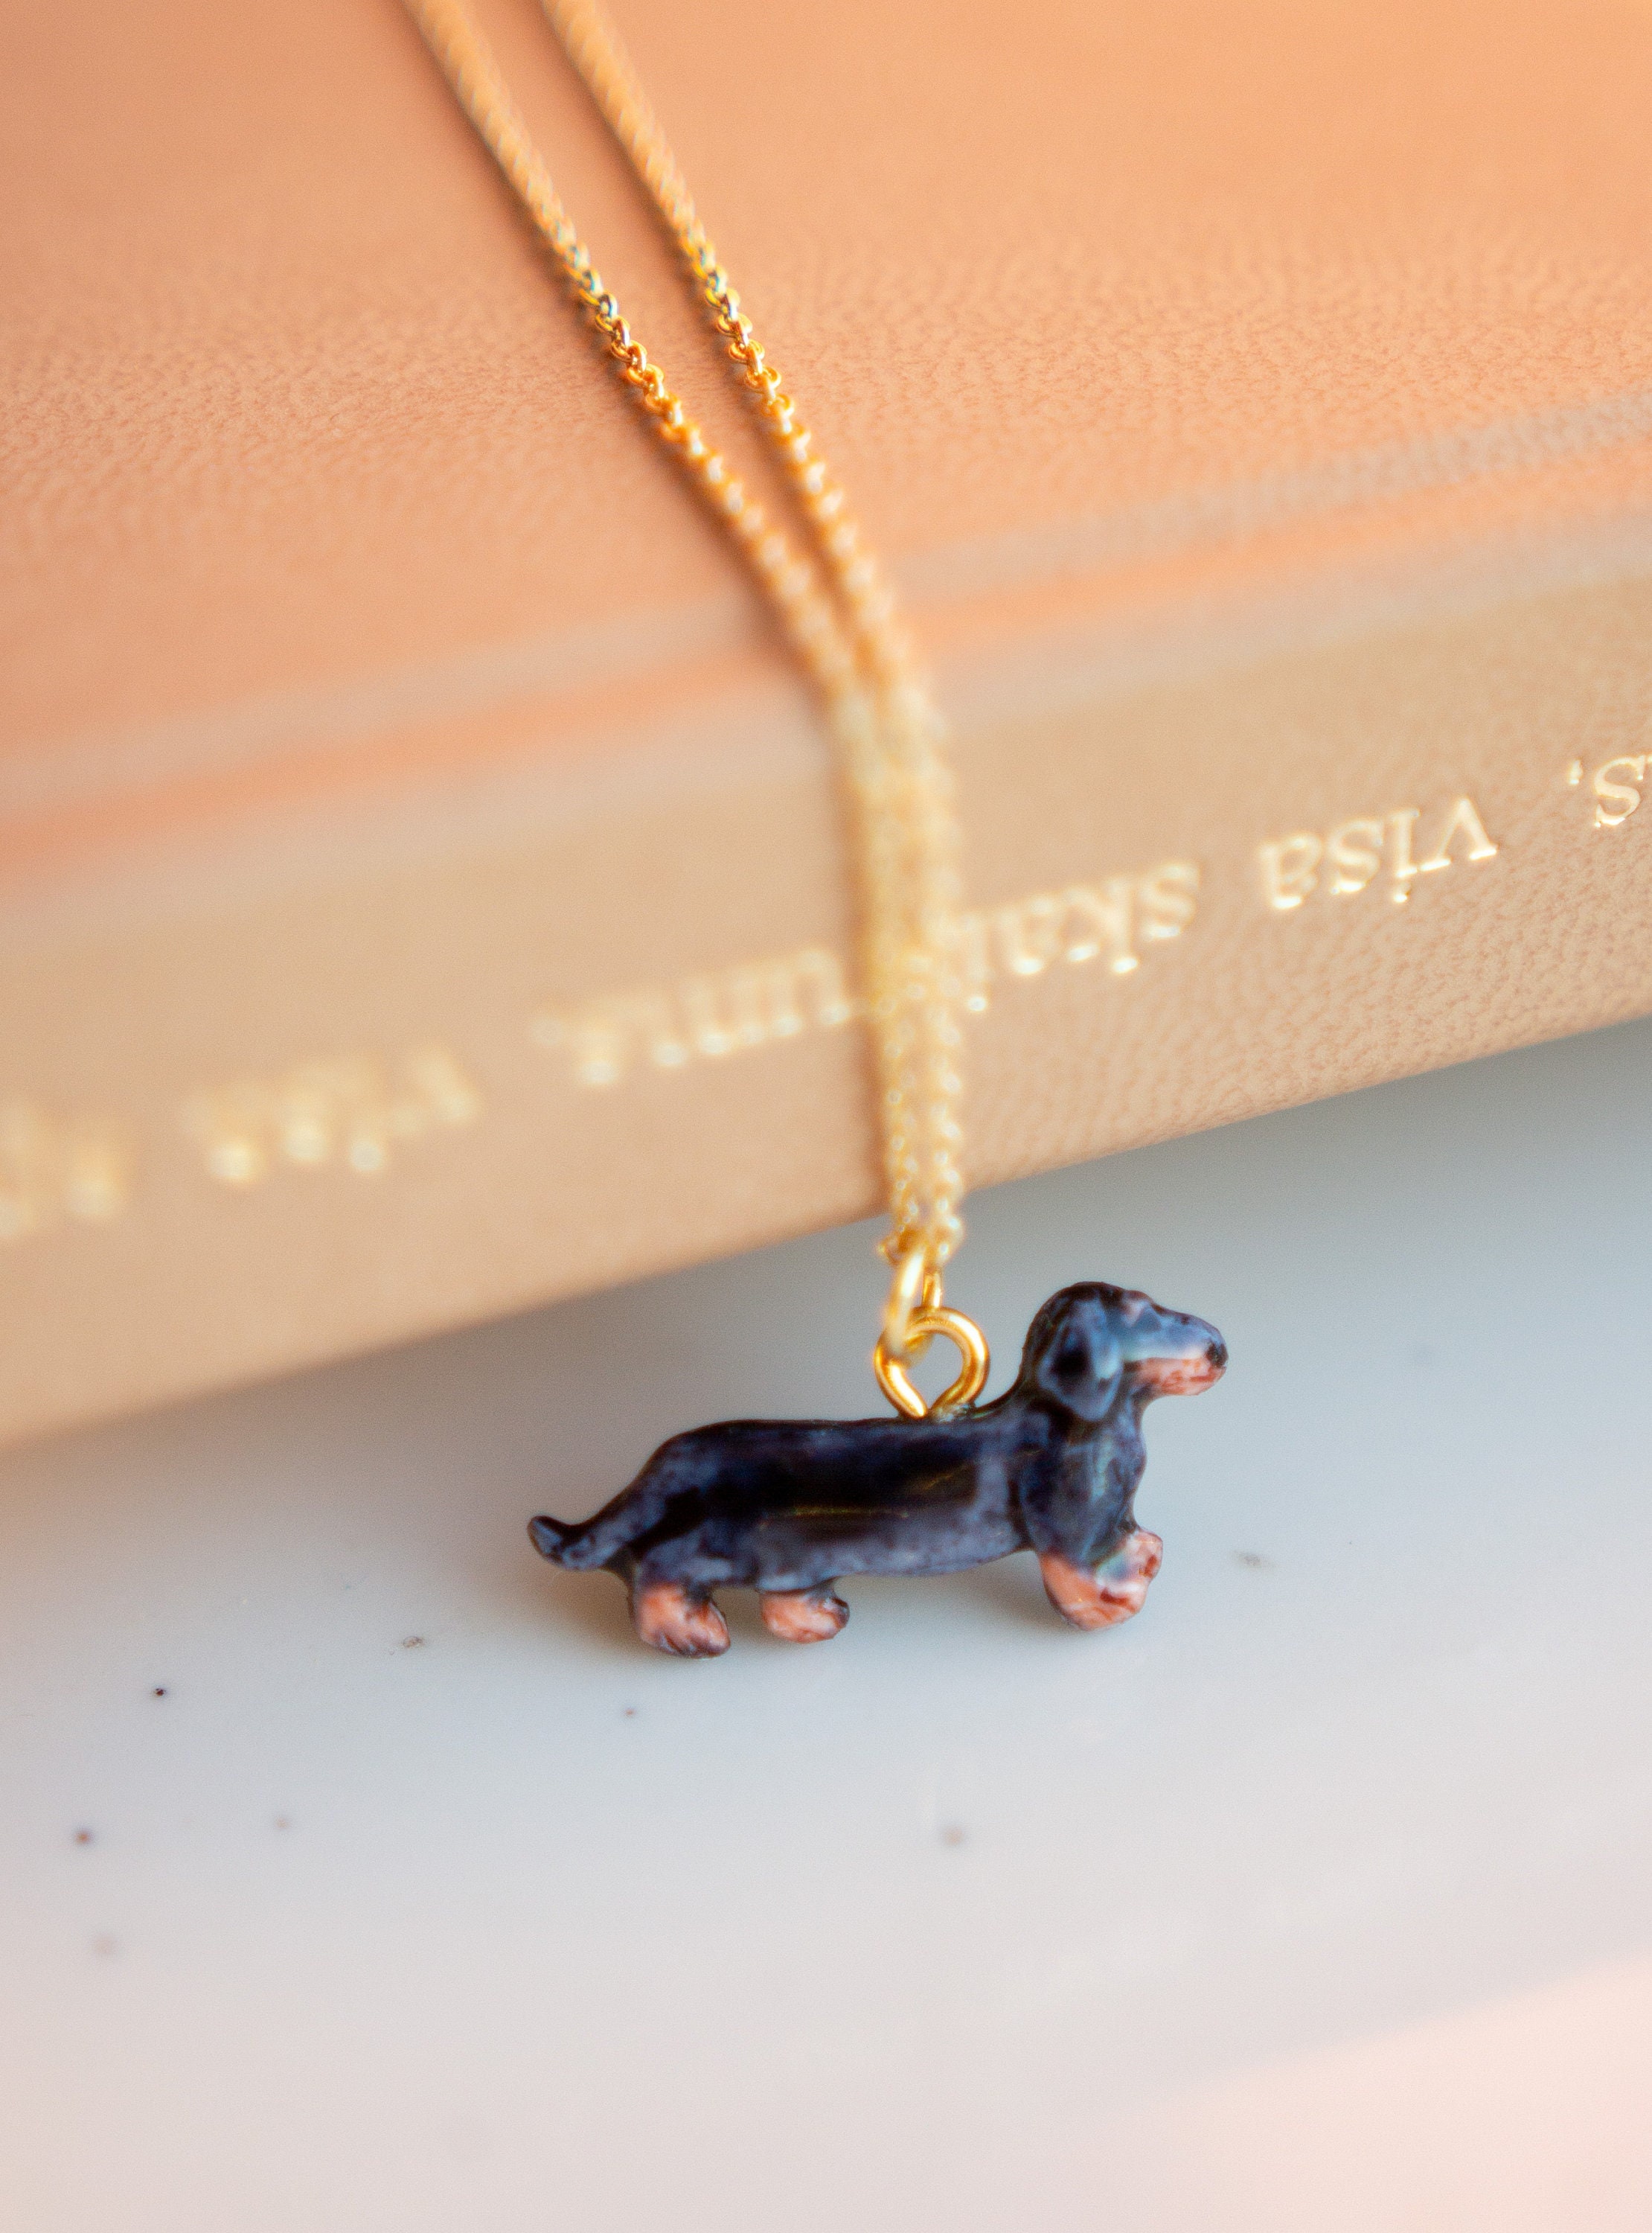 Carat in Karats 10K Yellow Gold Long-Haired Dachshund Dog Pendant Charm  (15.25mm x 16mm) With 14K Yellow Gold Lightweight Rope Chain Necklace 16''  - Walmart.com